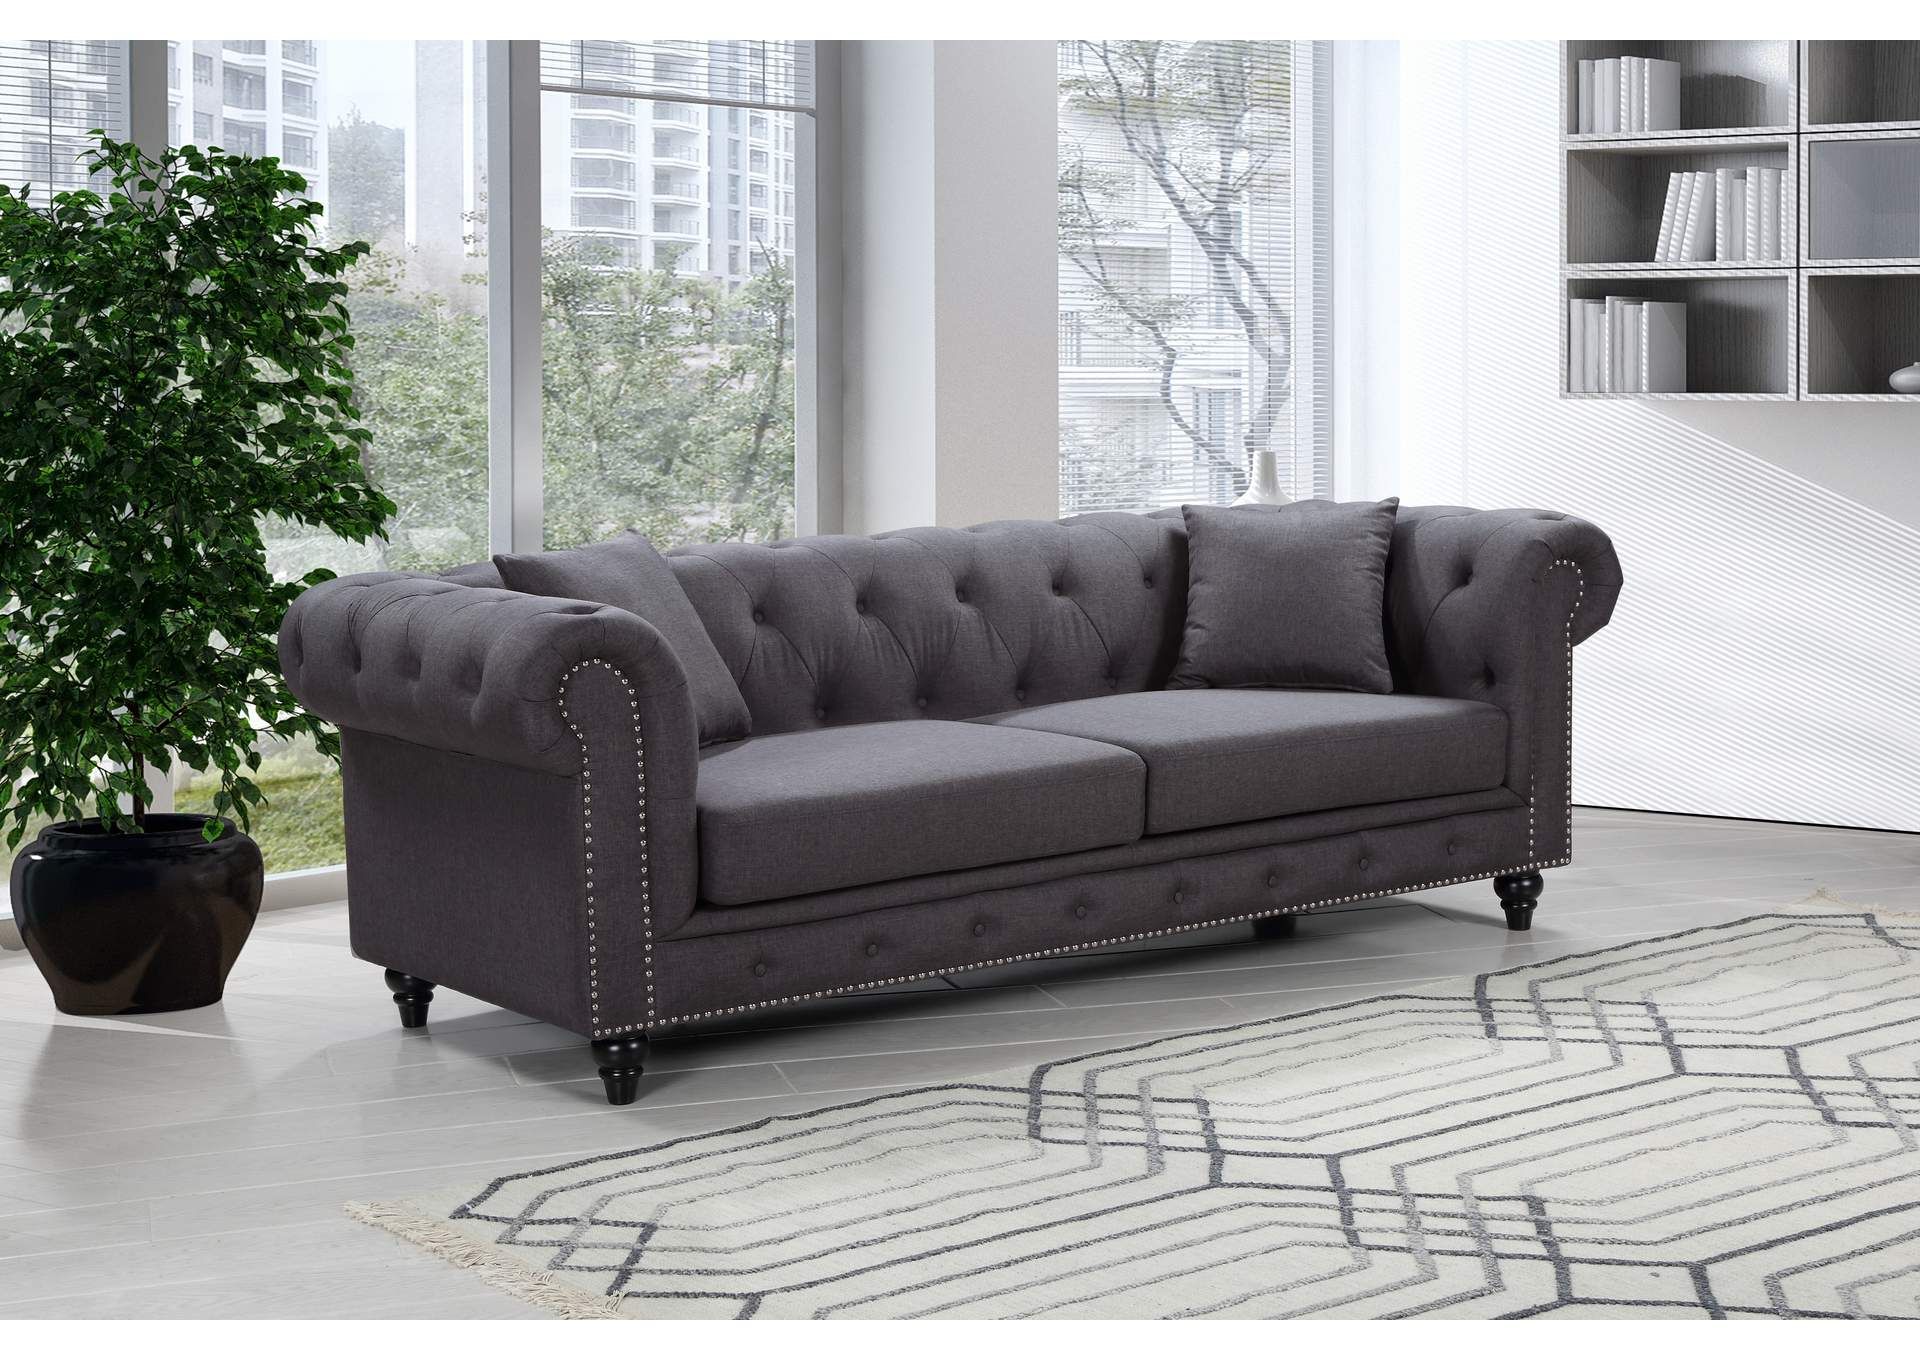 Chesterfield Grey Linen Sofa Best Buy Furniture And Mattress With Regard To Gray Linen Sofas (Gallery 11 of 20)